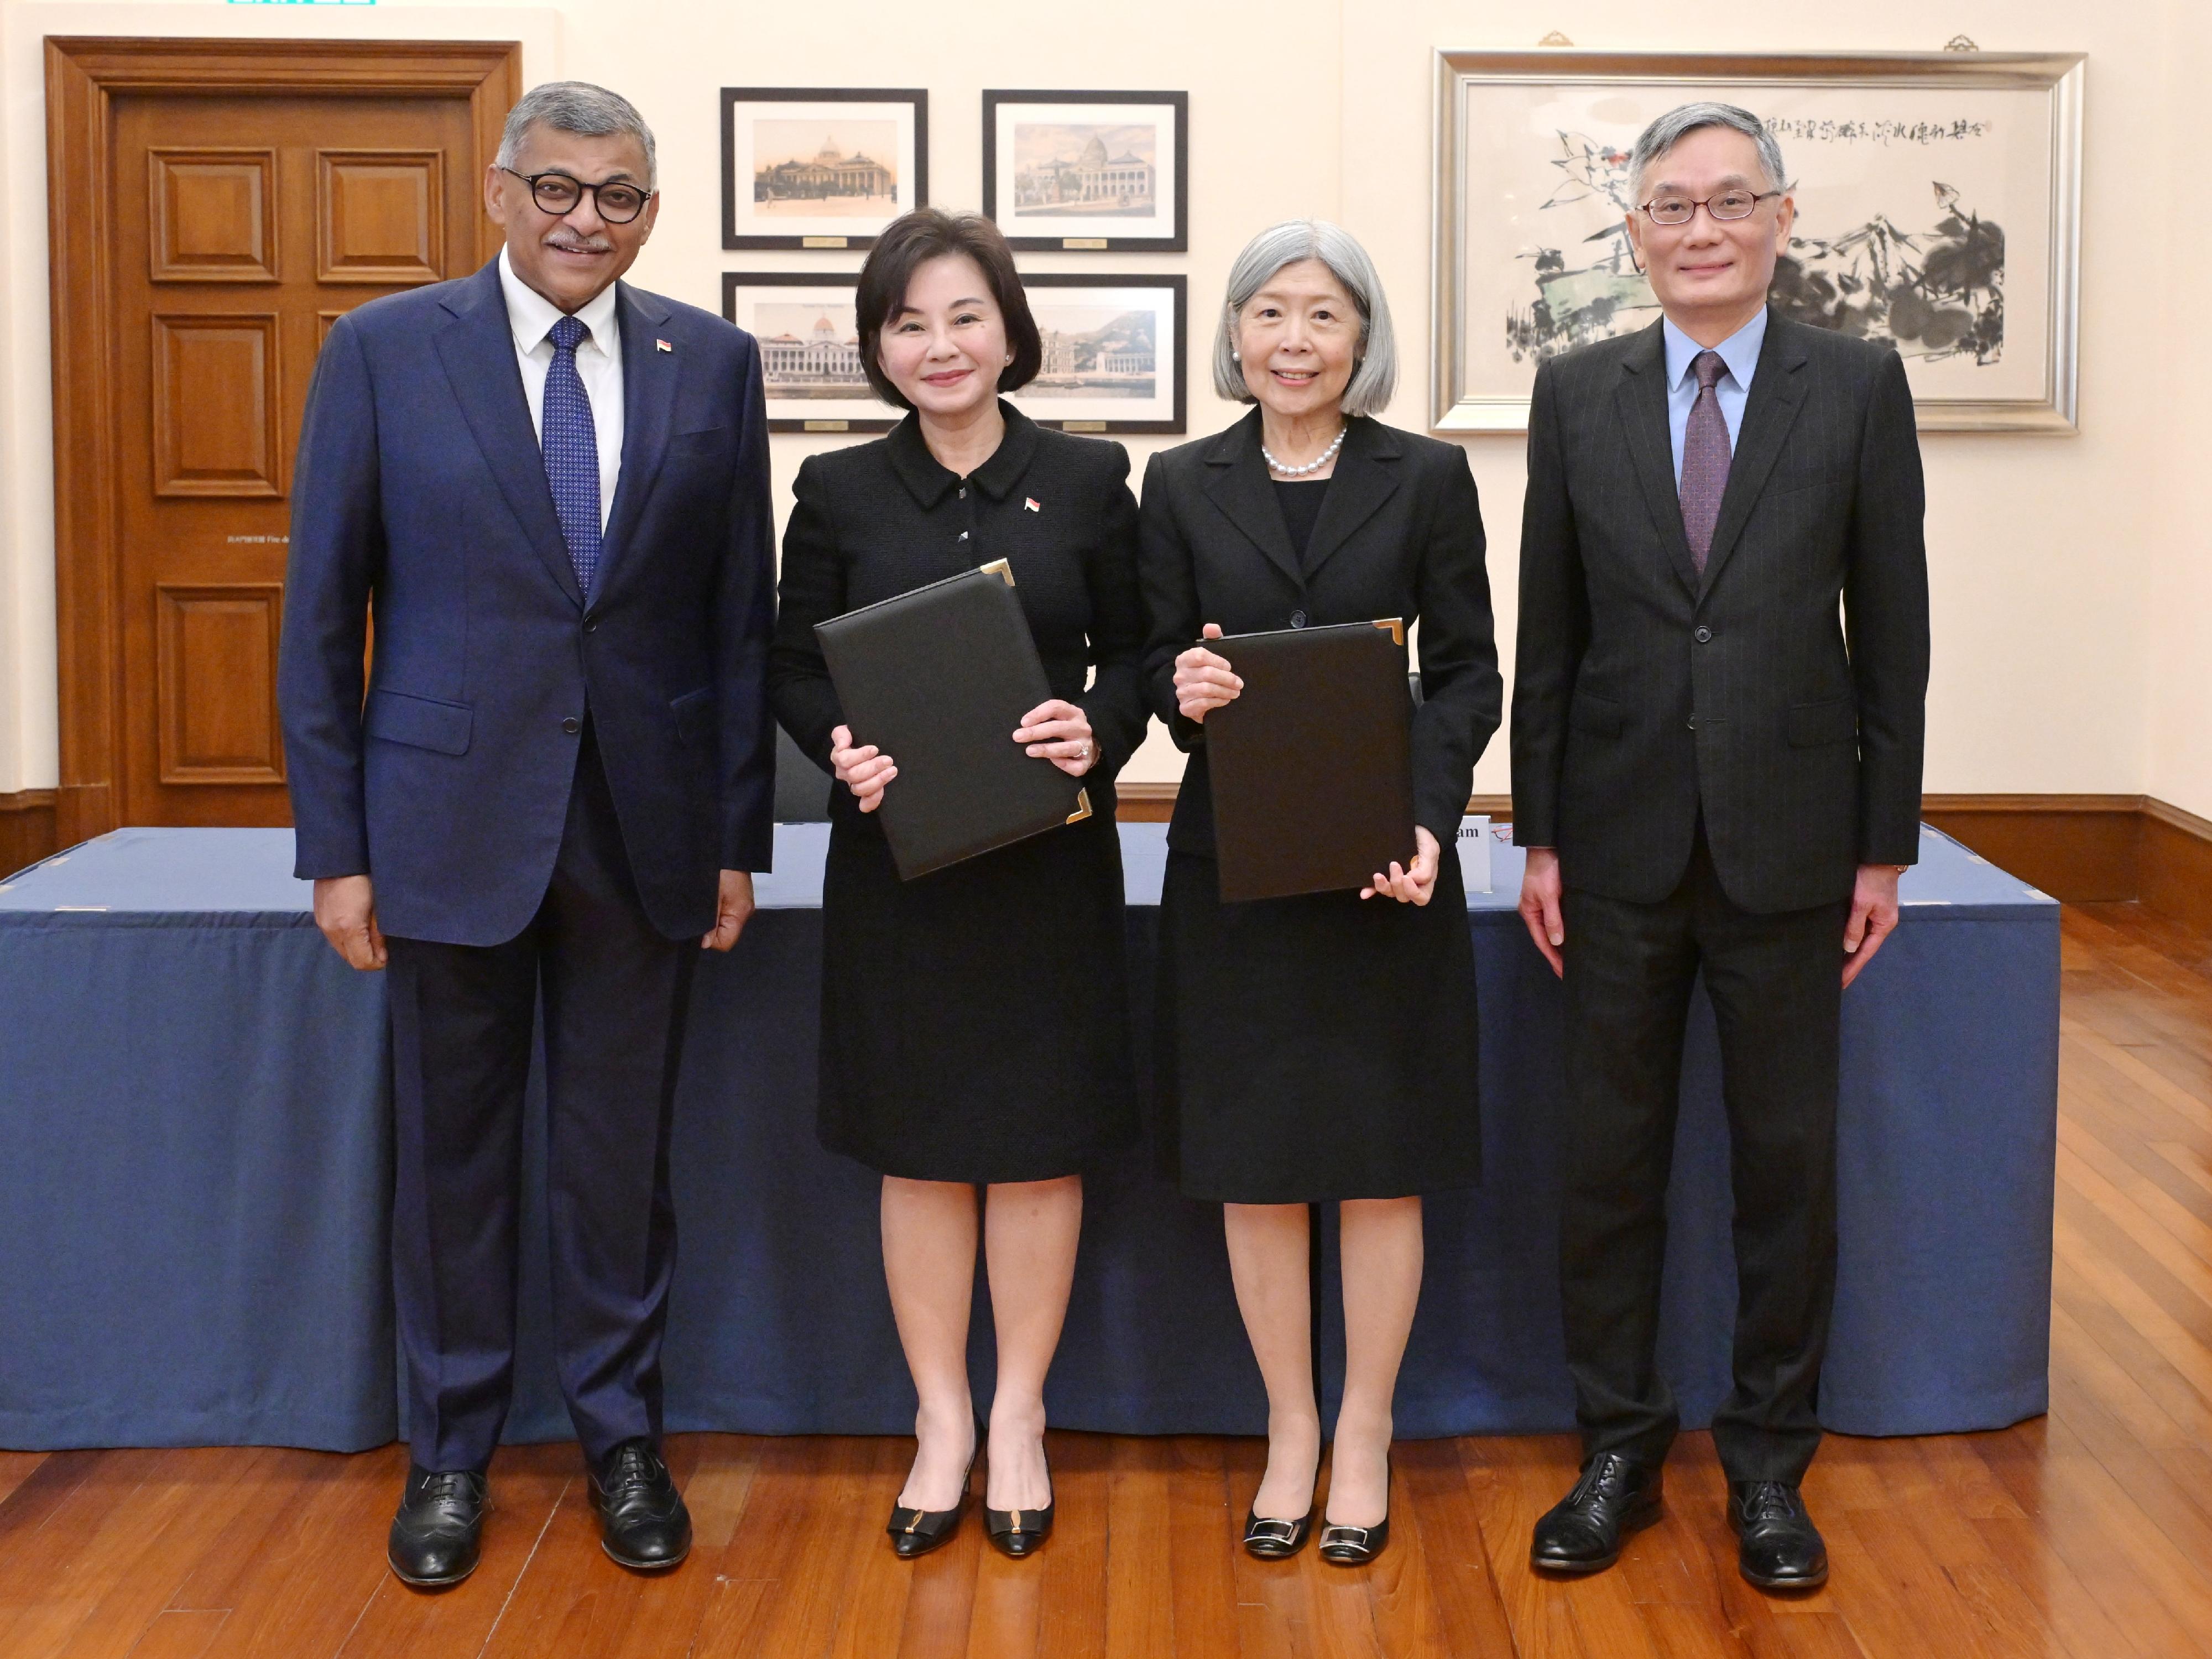 The Judiciary of the Hong Kong Special Administrative Region (HKSAR) and the Judiciary of Singapore signed a Memorandum of Understanding today (March 15) to enhance judicial exchanges in promoting the efficient administration of the family justice systems in the two jurisdictions. Photo shows (from left) The Honourable the Chief Justice Sundaresh Menon of Singapore; Justice Teh Hwee Hwee, Judge of the High Court and Presiding Judge of the Family Justice Courts of Singapore; Madam Justice Bebe Chu, Judge of the Court of First Instance of the High Court of the HKSAR with special responsibility for family cases; and The Honourable Chief Justice Andrew Cheung Kui-nung, Chief Justice of the Court of Final Appeal of the HKSAR. 